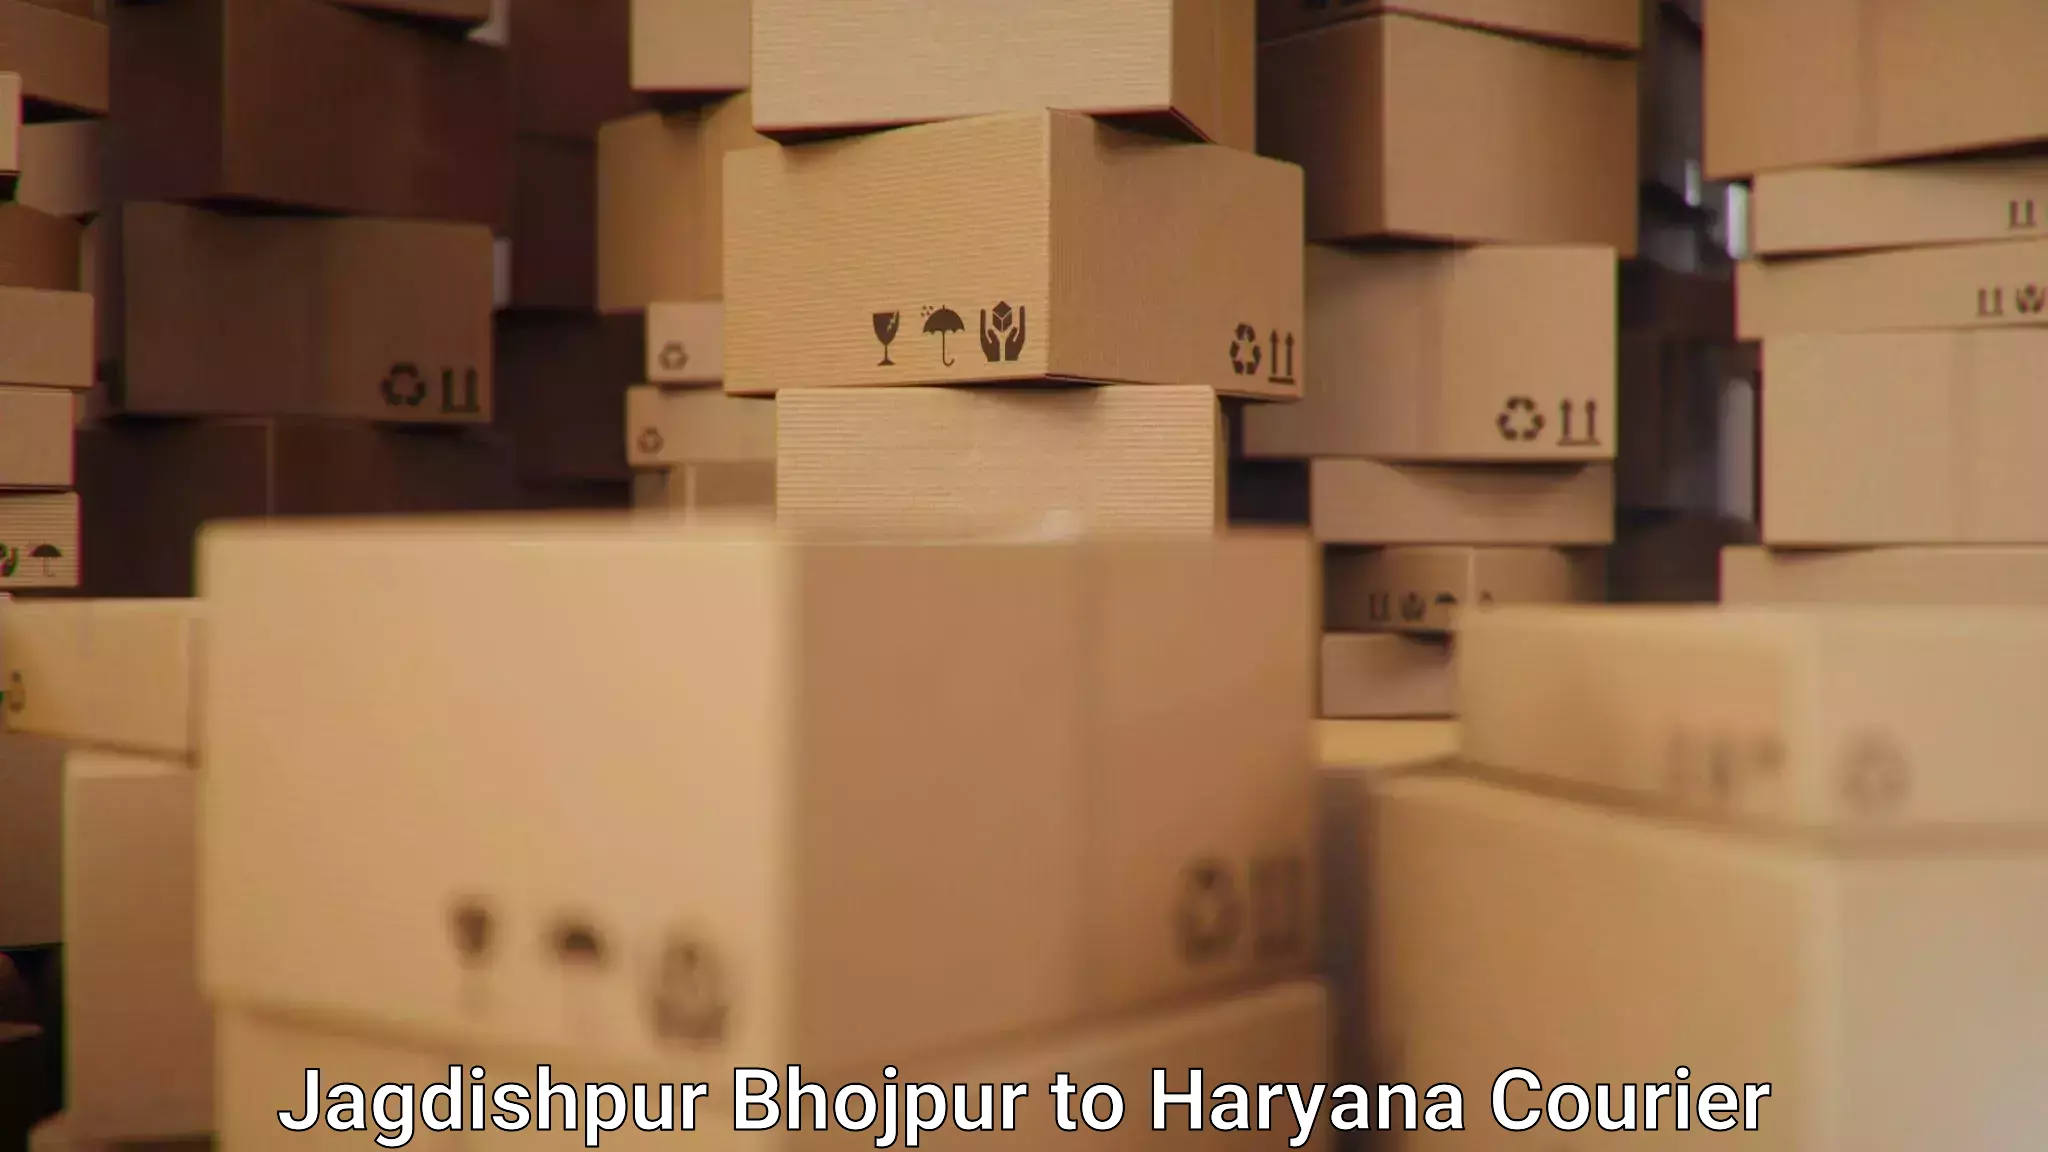 Rapid shipping services in Jagdishpur Bhojpur to Bhiwani